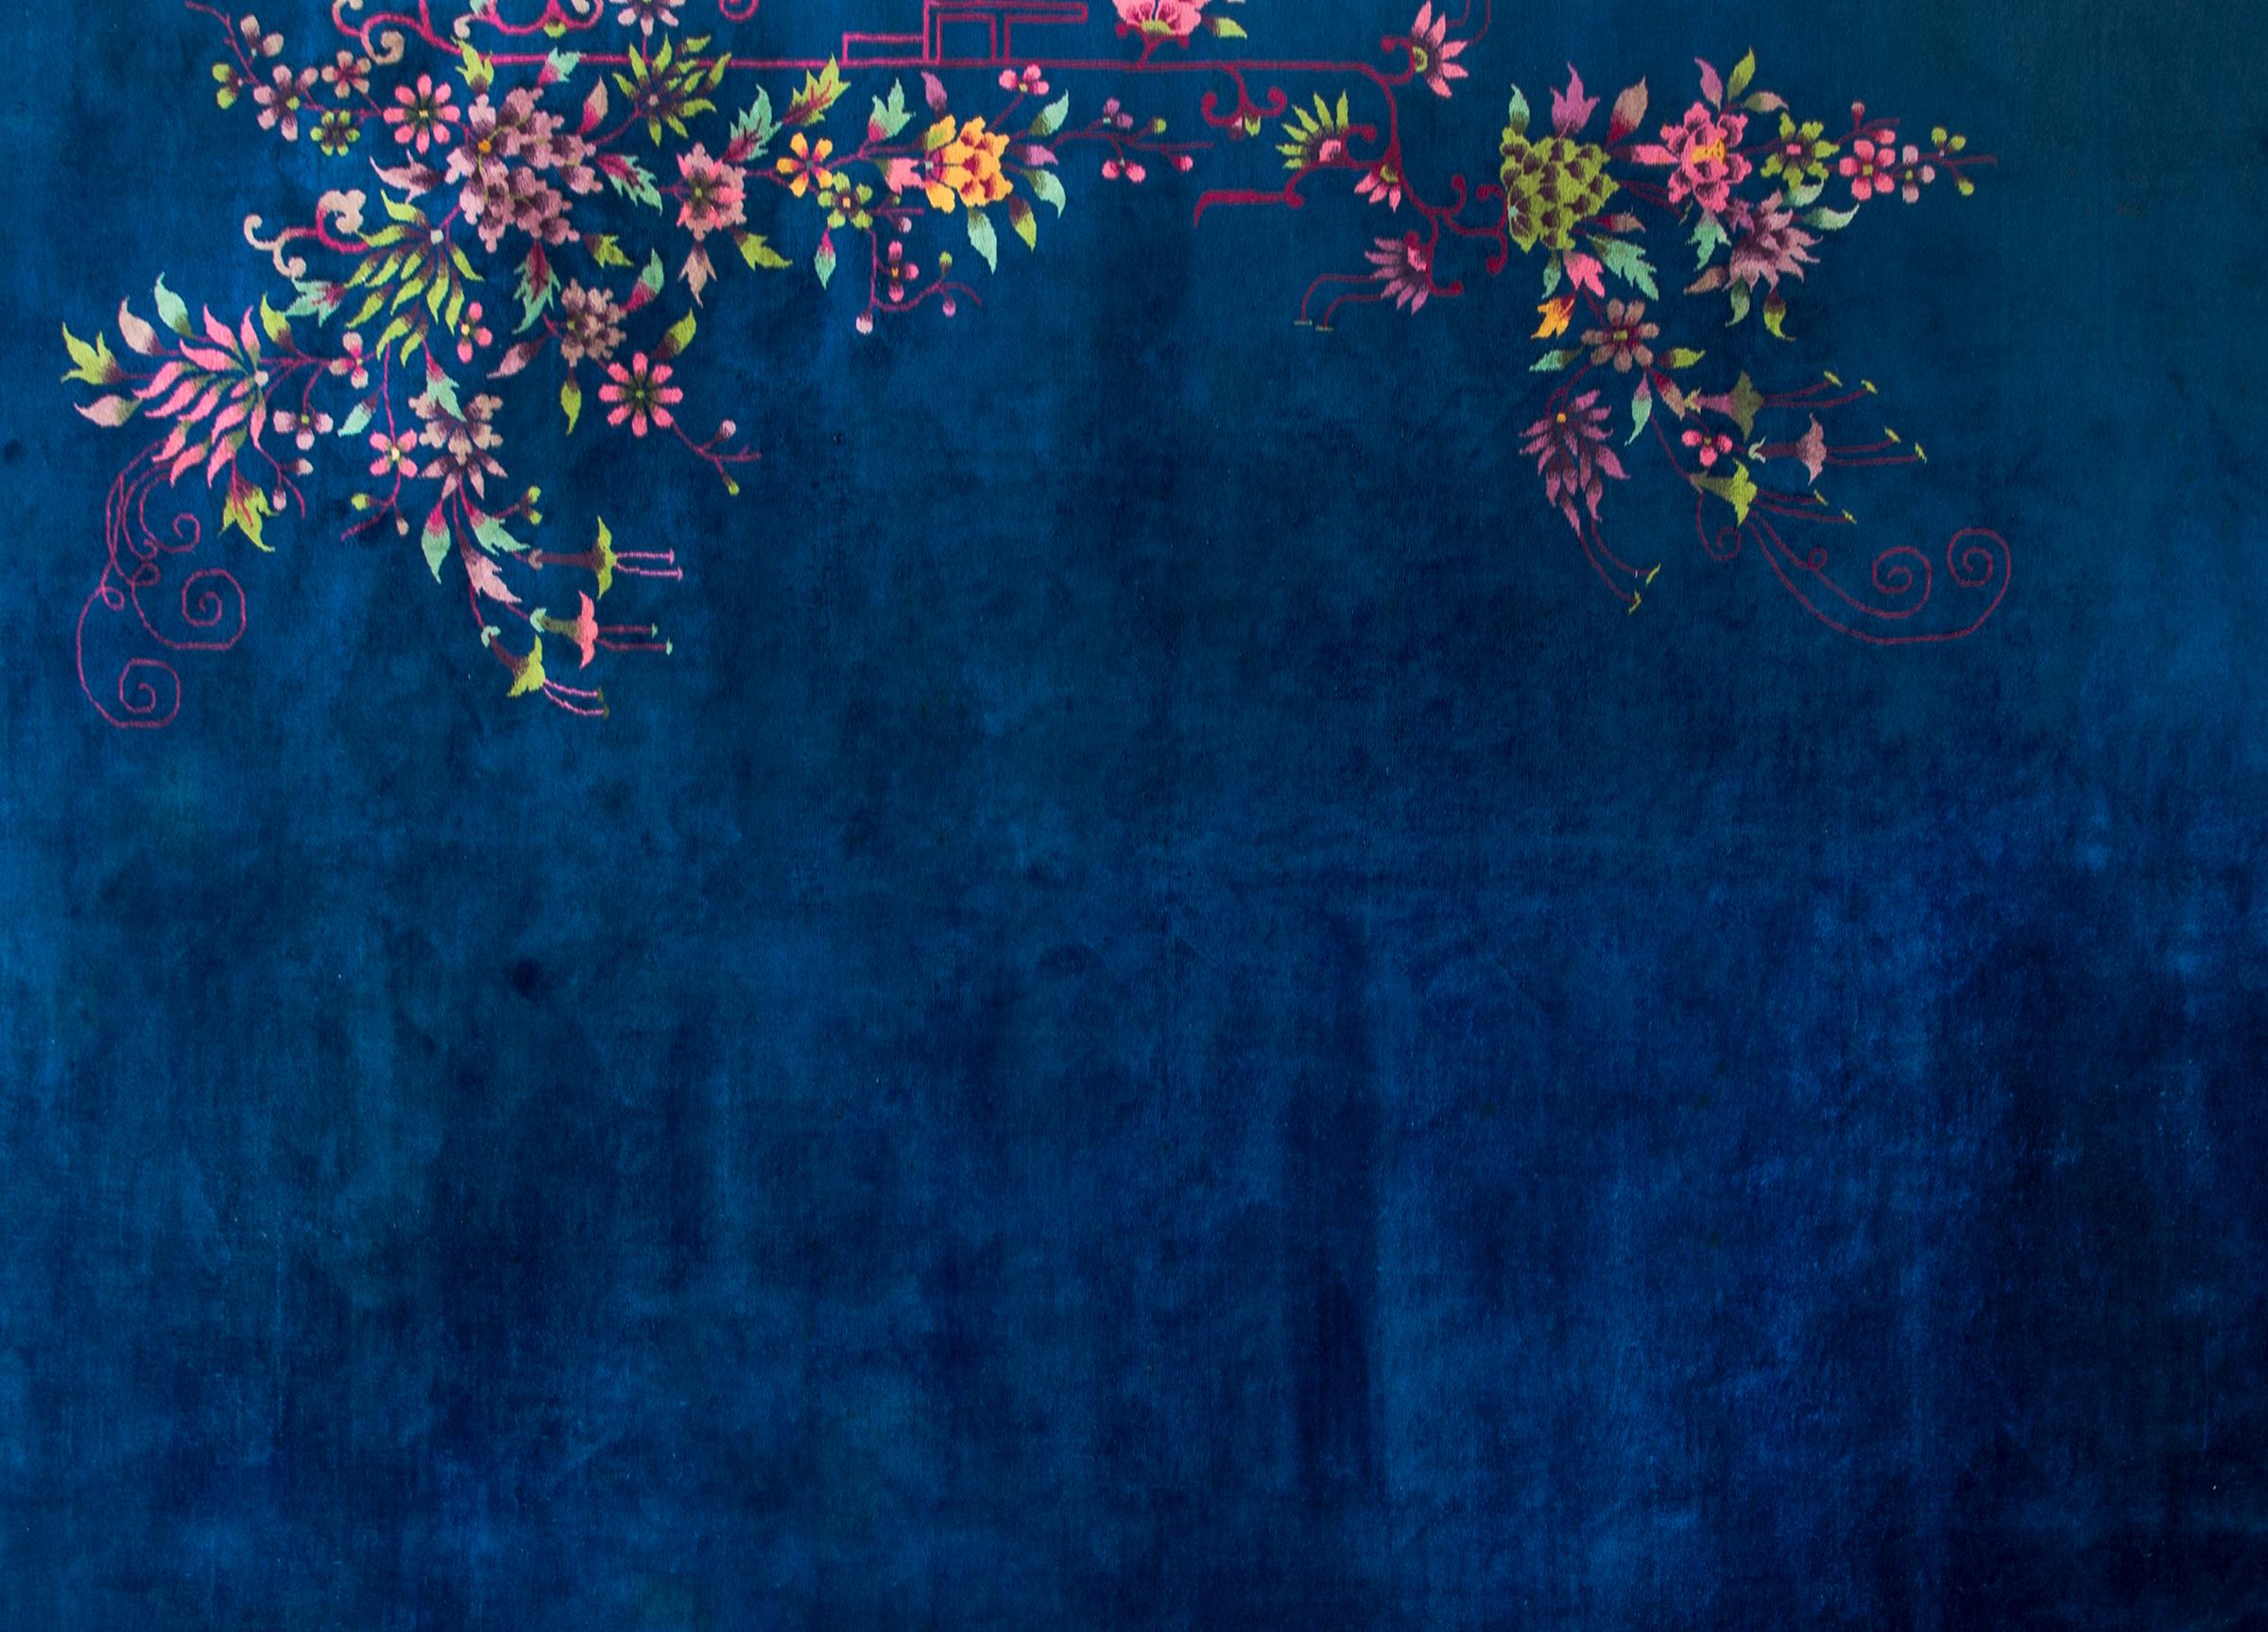 A wonderful early 20th century Chinese Art Deco rug with a bold dark indigo background with an asymmetrical floral cluster with chrysanthemums, peonies, and prunus blossoms woven in myriad colors including pinks, oranges, turquoises, and greens.